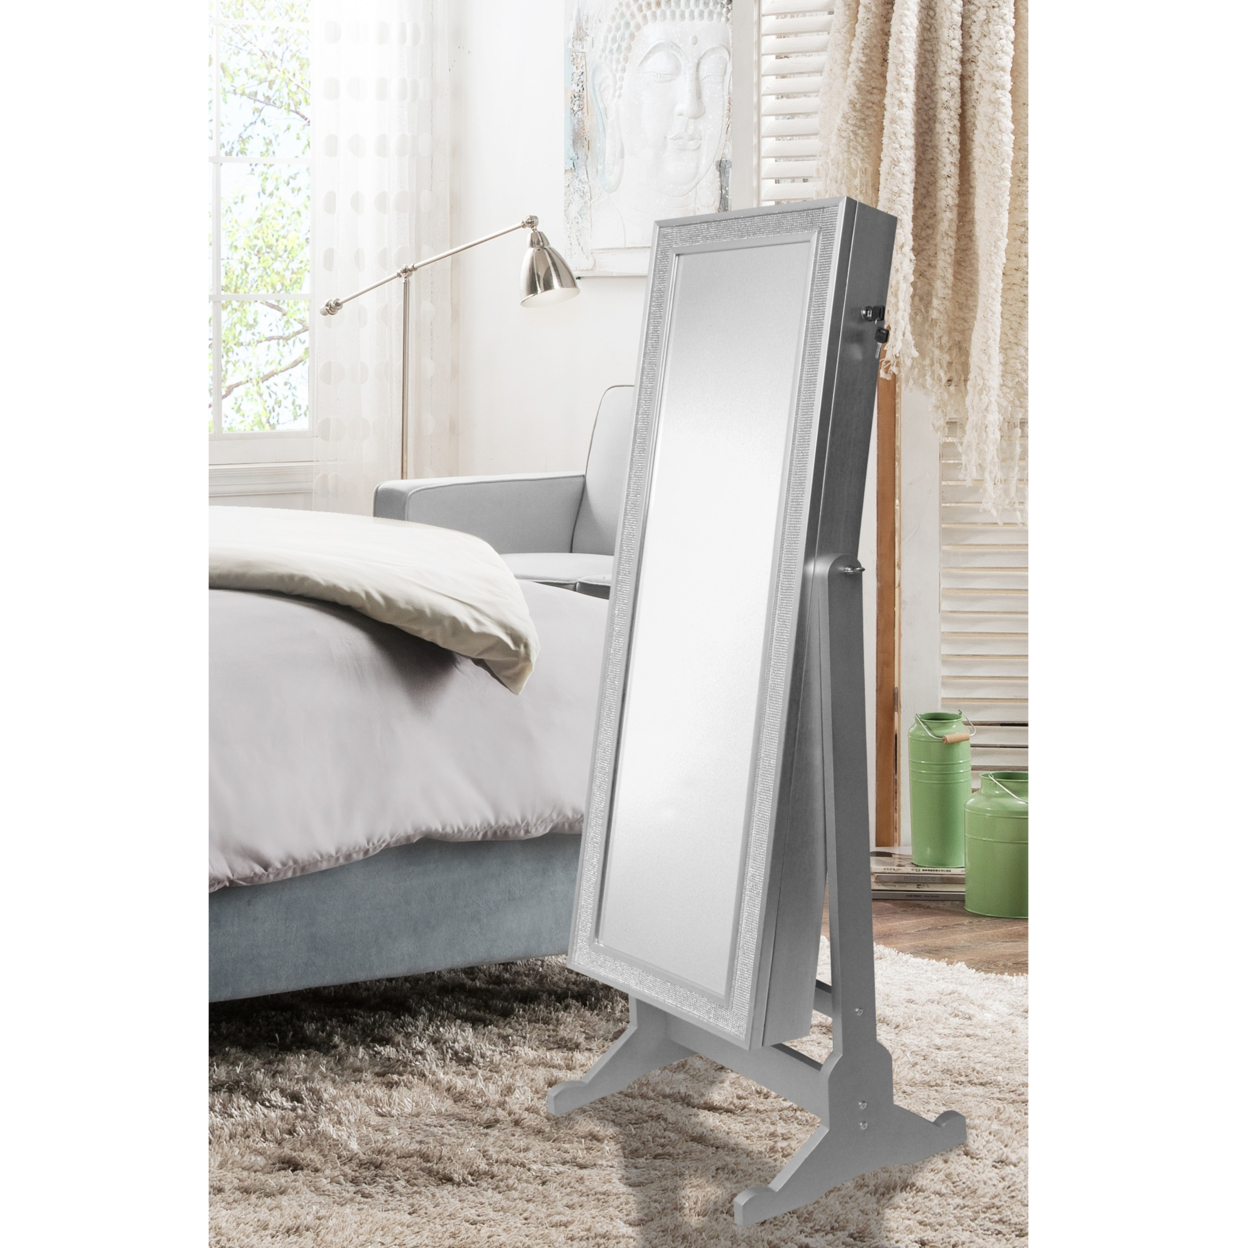 Jazzy Crystal-Bordered Rectangular Jewelry Storage Armoire Cheval Mirror Full-length - Classic Silver